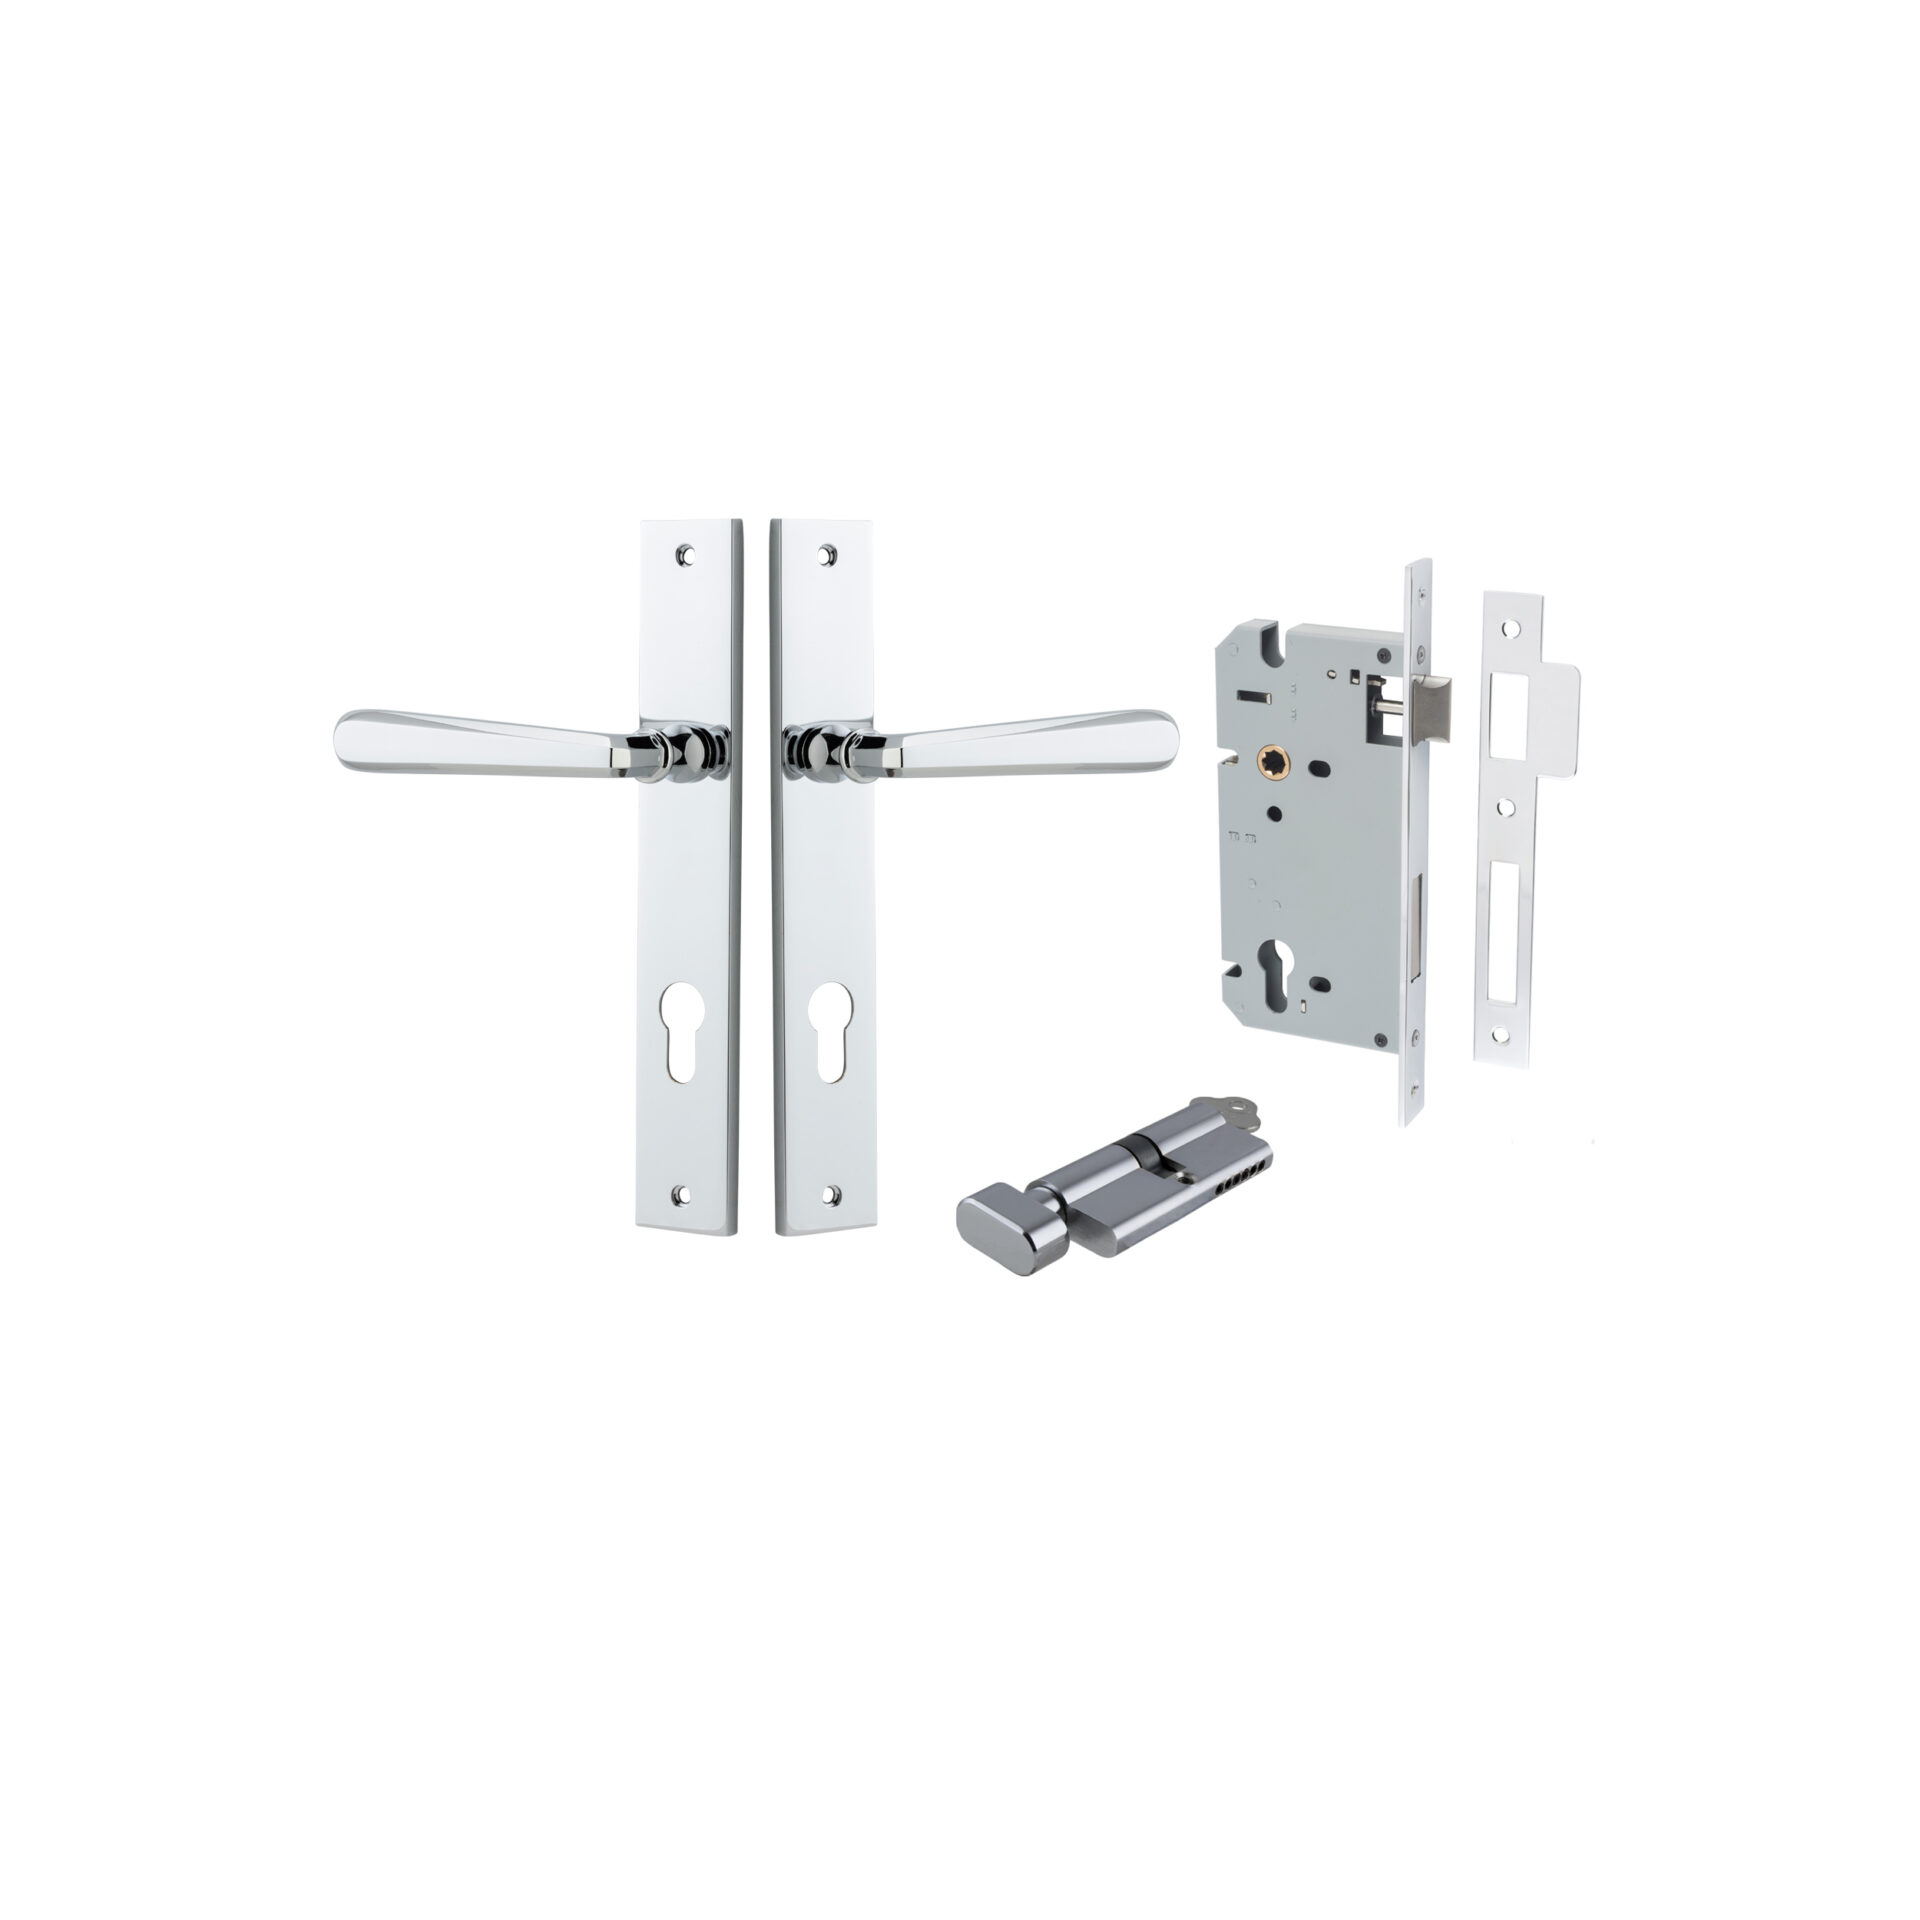 Copenhagen Lever - Rectangular Backplate Entrance Kit with High Security Lock